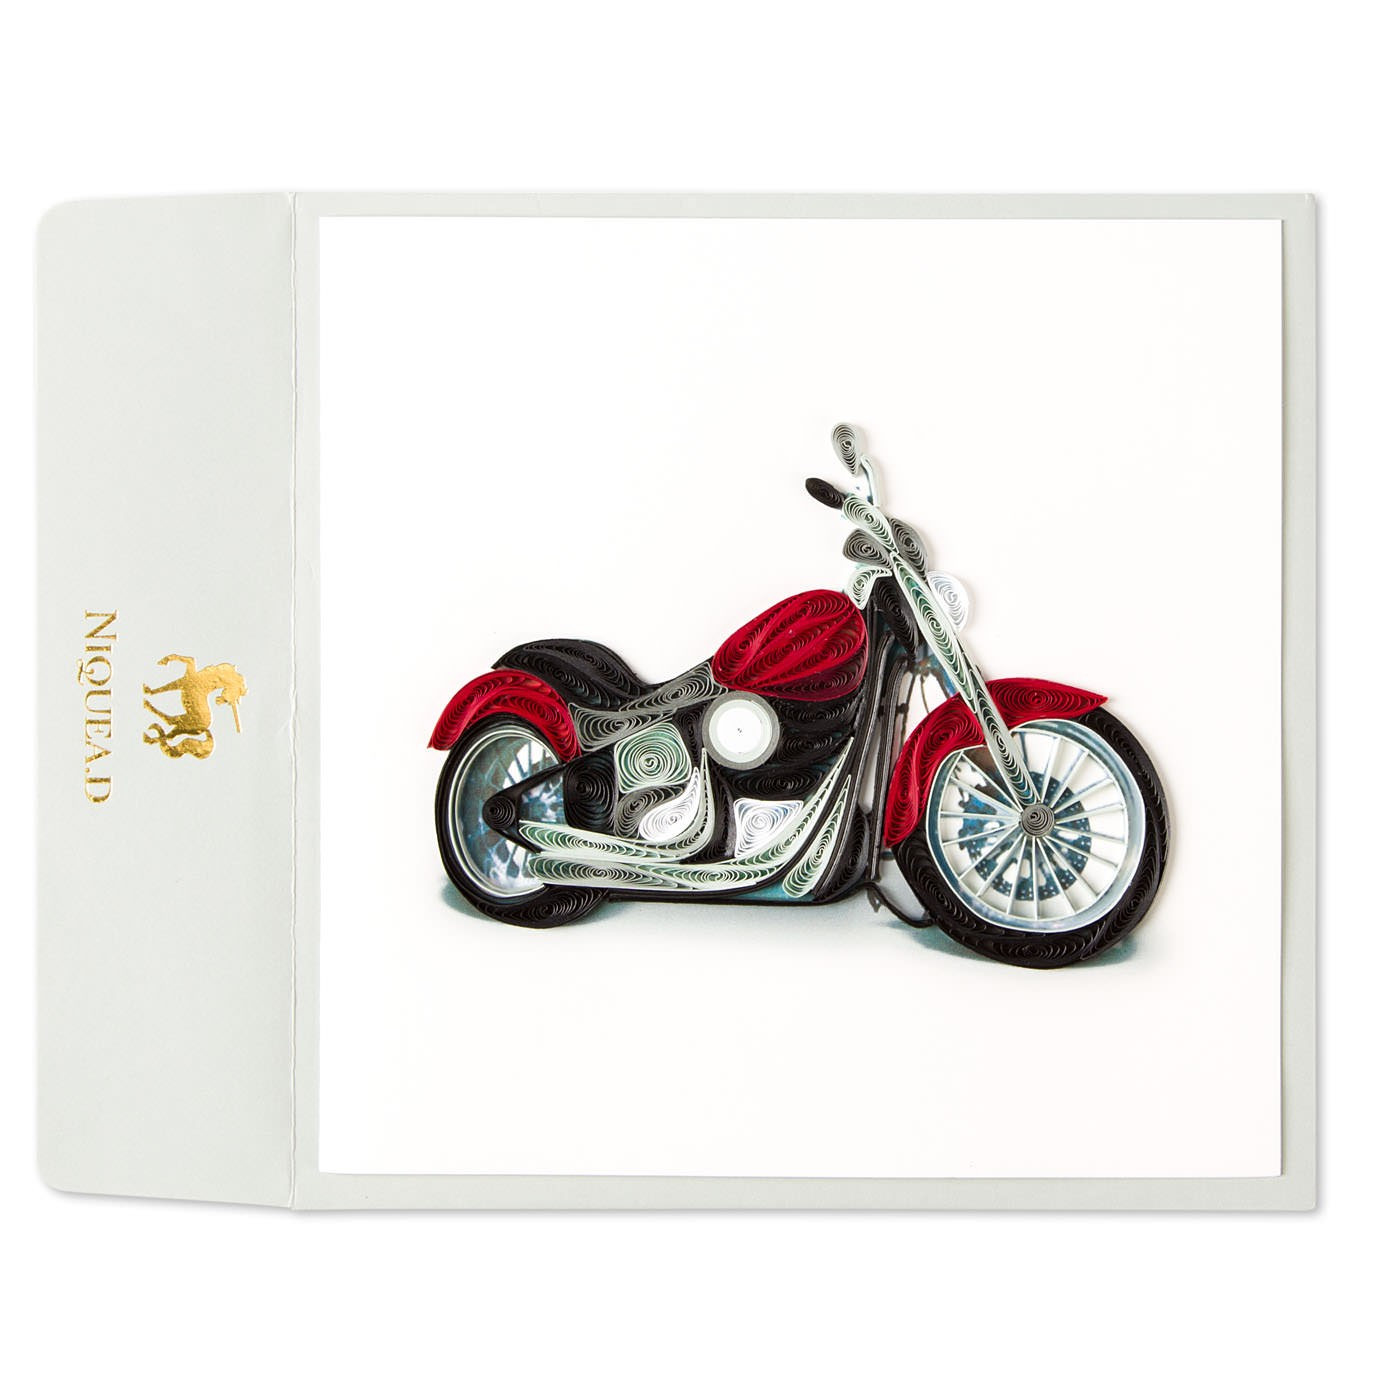 Motorcycle Birthday Cards
 Quilled Motorcycle Birthday Card Birthday Cards for Him